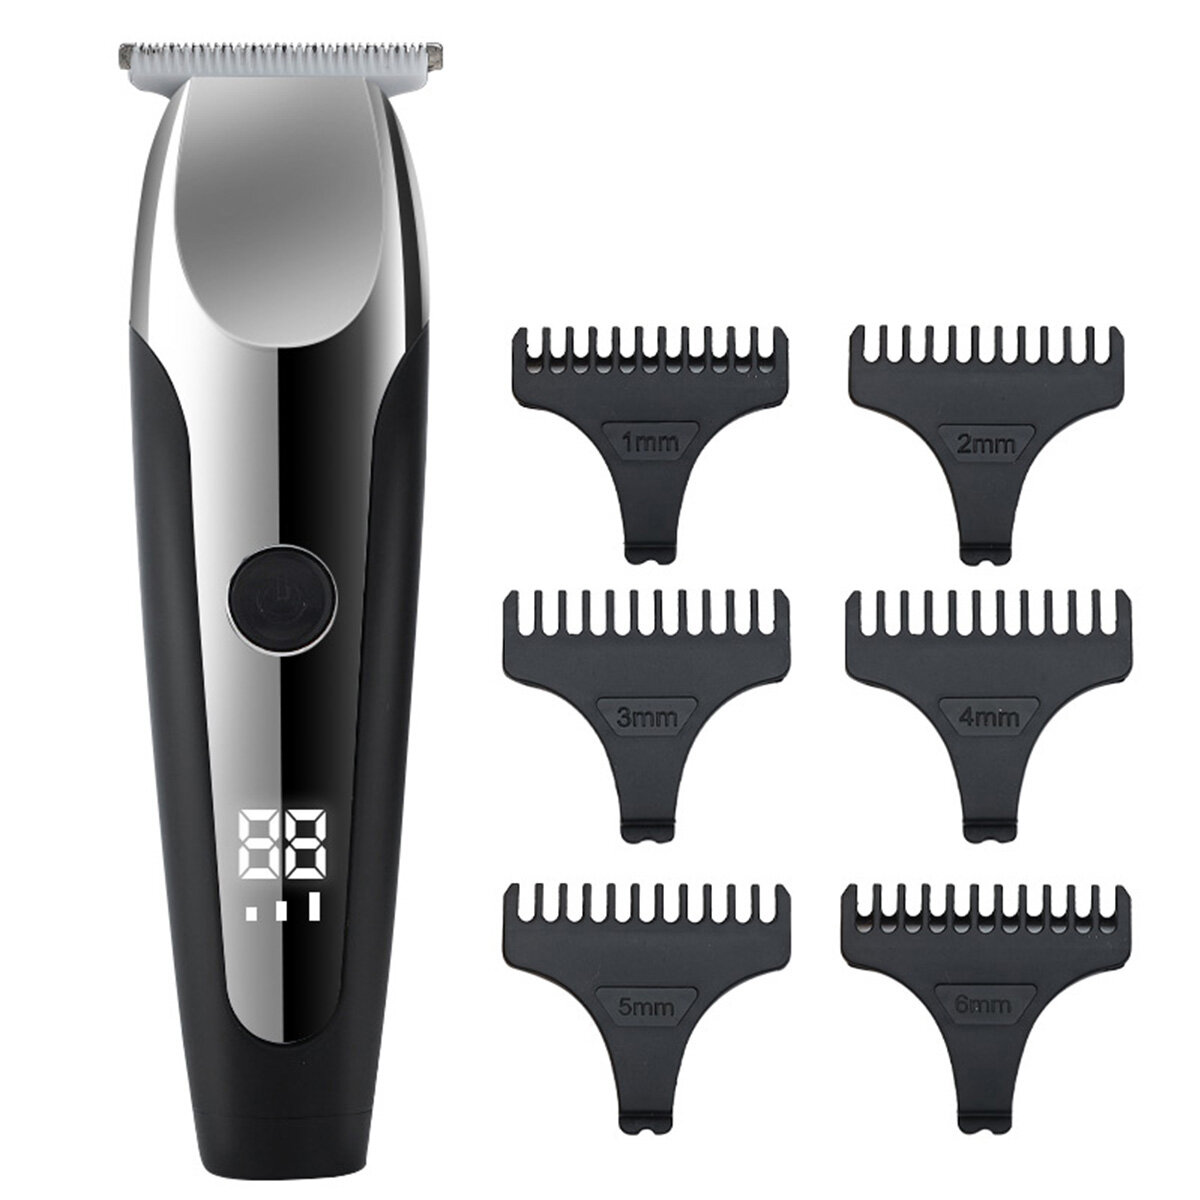 

USB Rechargeable Cordless Electric Beard Trimmer Mens Hair Clippers Grooming Kit W/ 4 Limit Combs